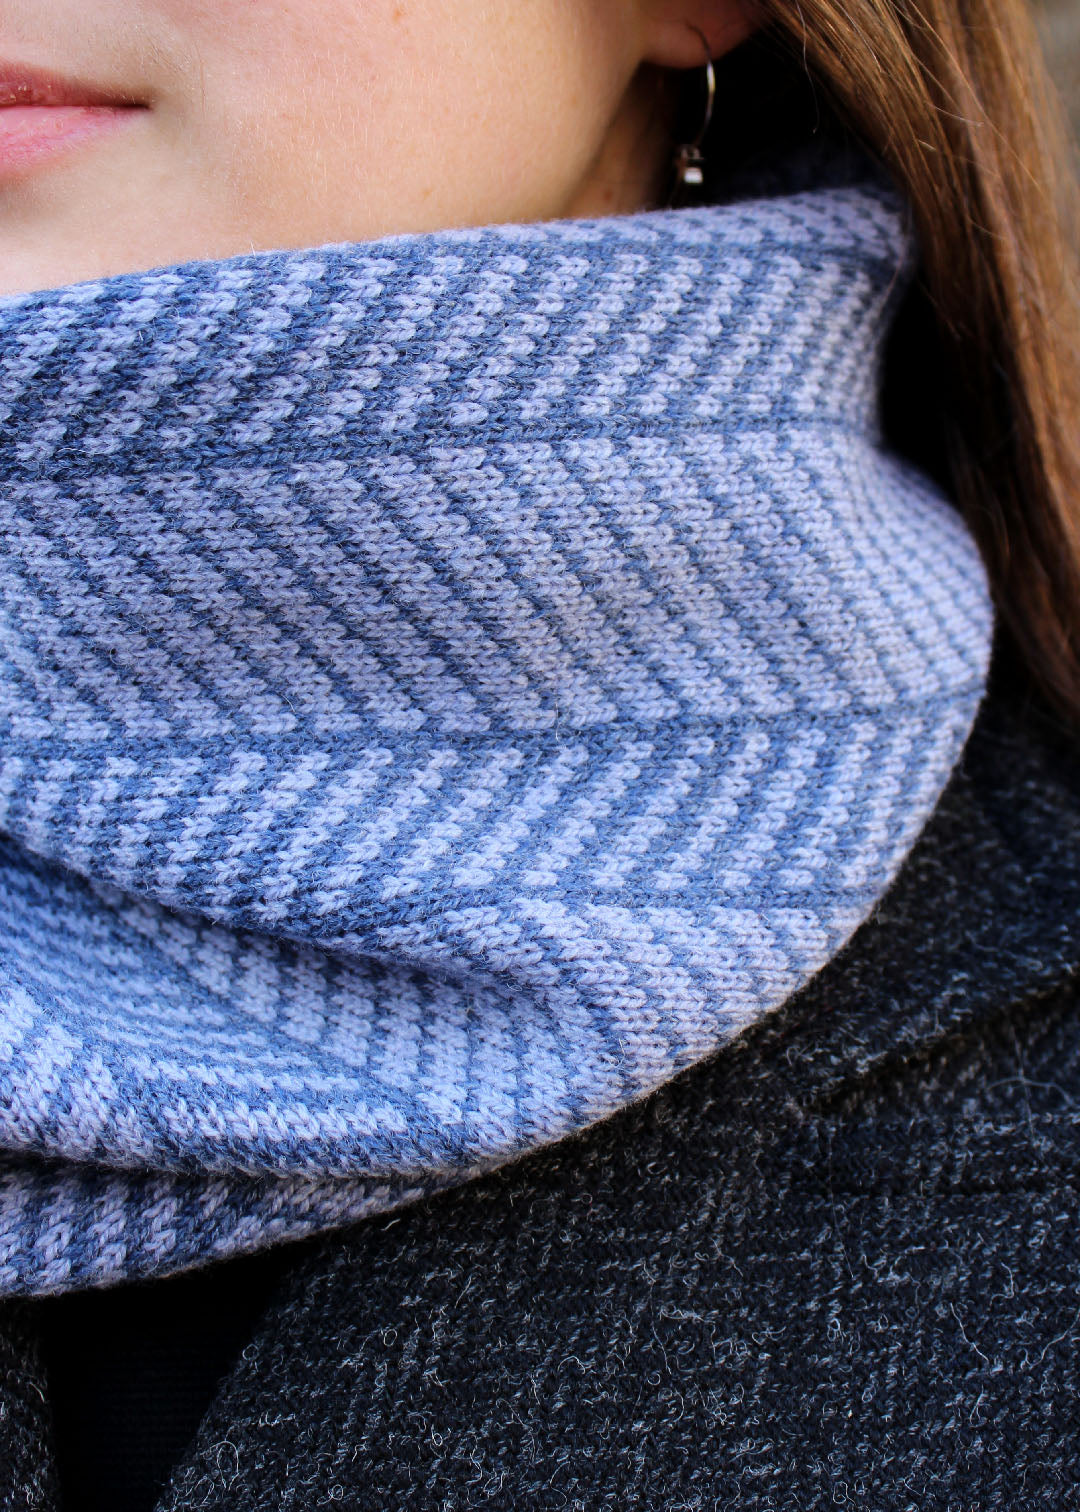 Merino lambswool neck warmer in shades of blue-grey with a design inspired by the glass roof of Waverley Railway Station in Ed